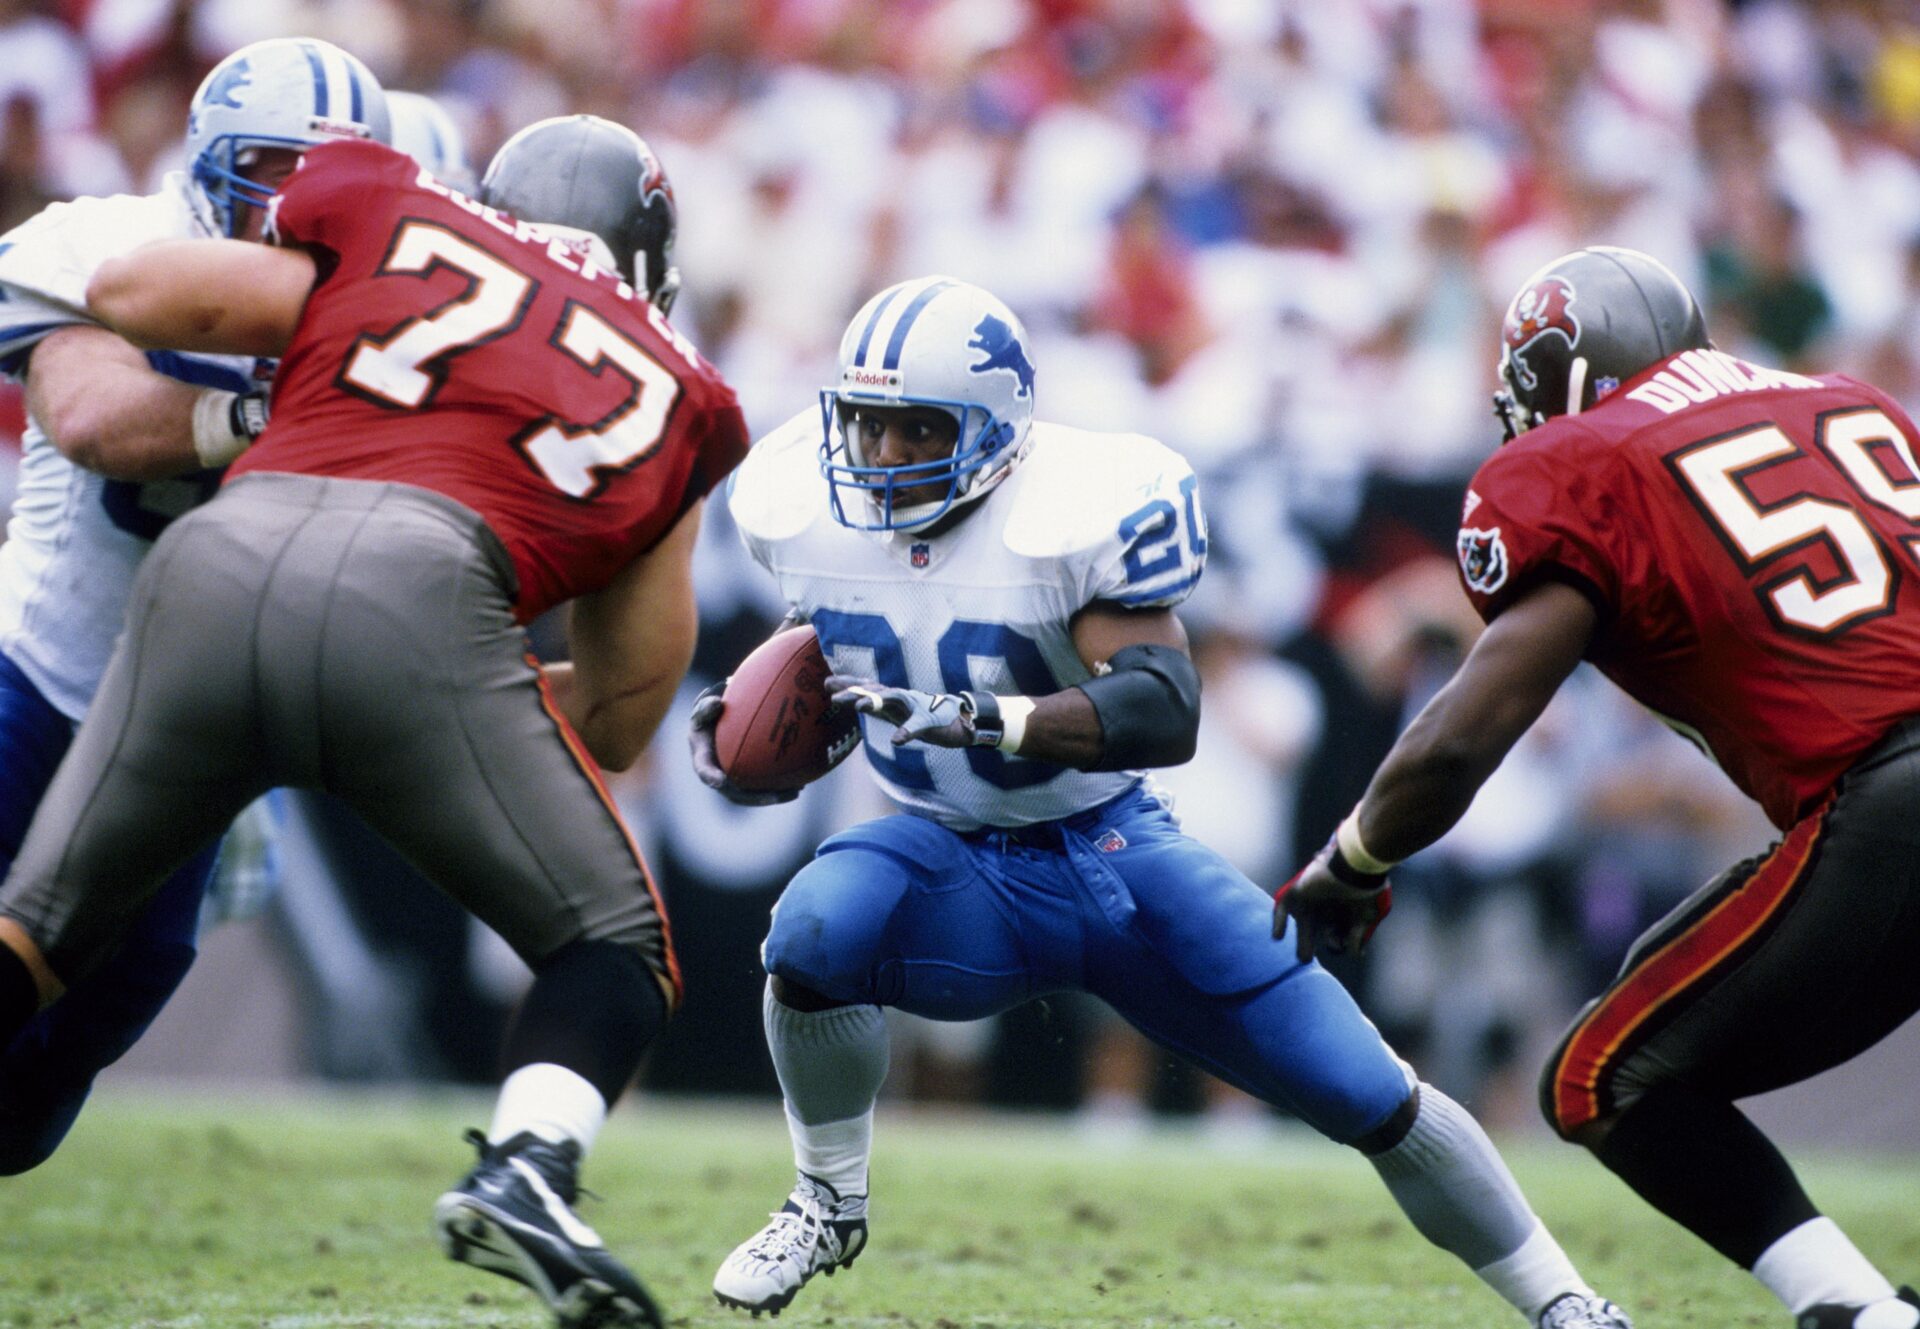 NFL Legend Barry Sanders Suffers ‘Heart Related’ Health Scare [VIDEOS]